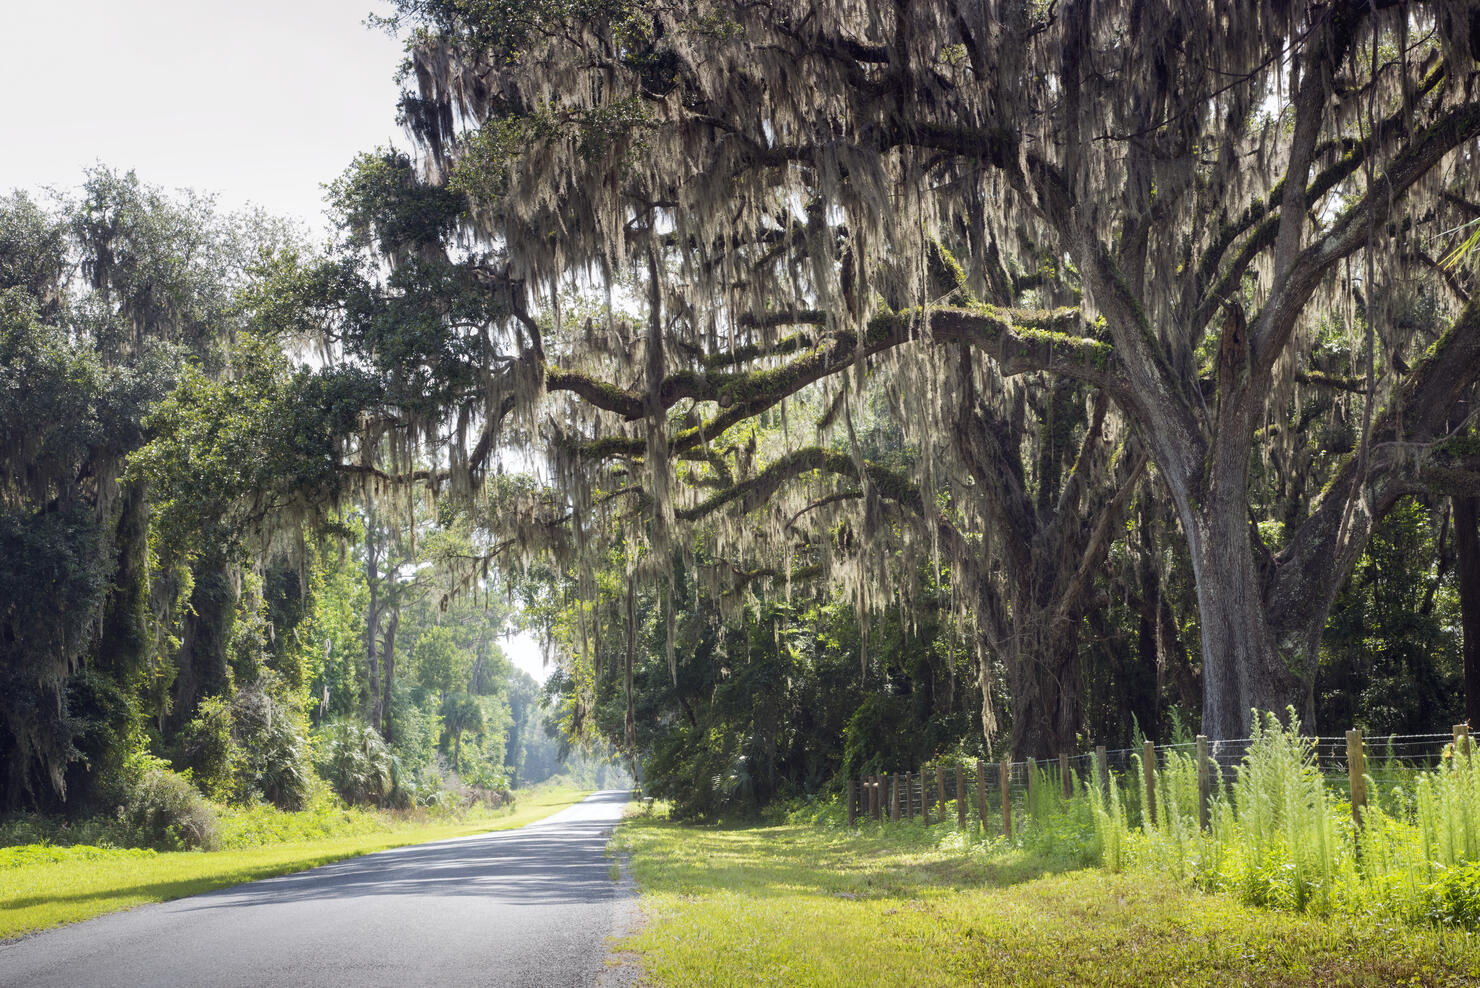 Country Road, Ancient Oak Trees, Spanish Moss